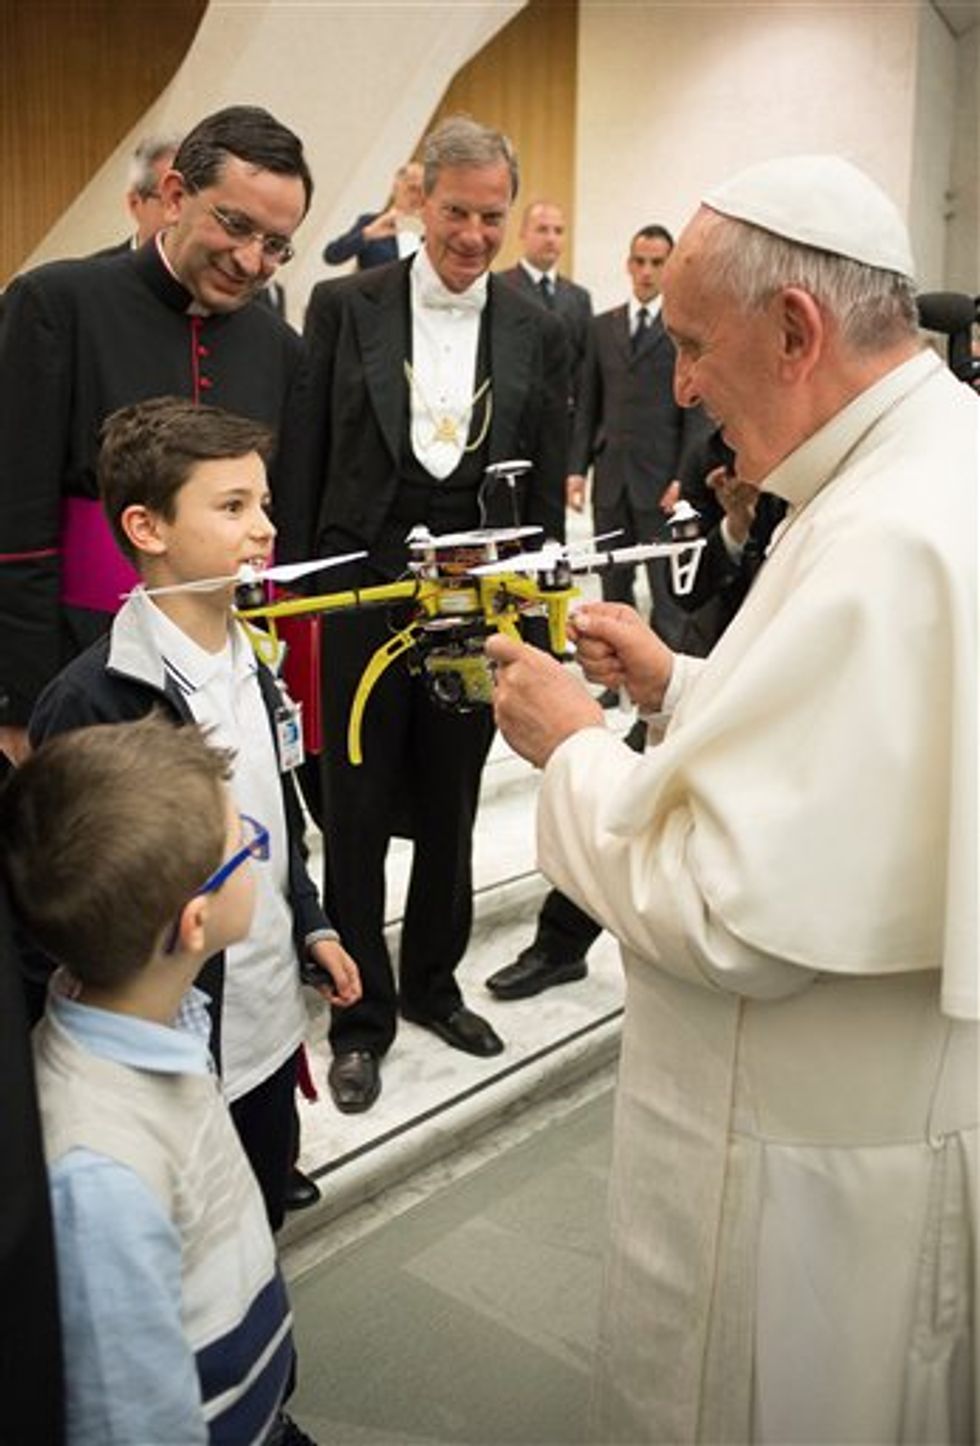 FAA's Message to Those Attending Any Events With the Pope: 'Leave Your Drone at Home